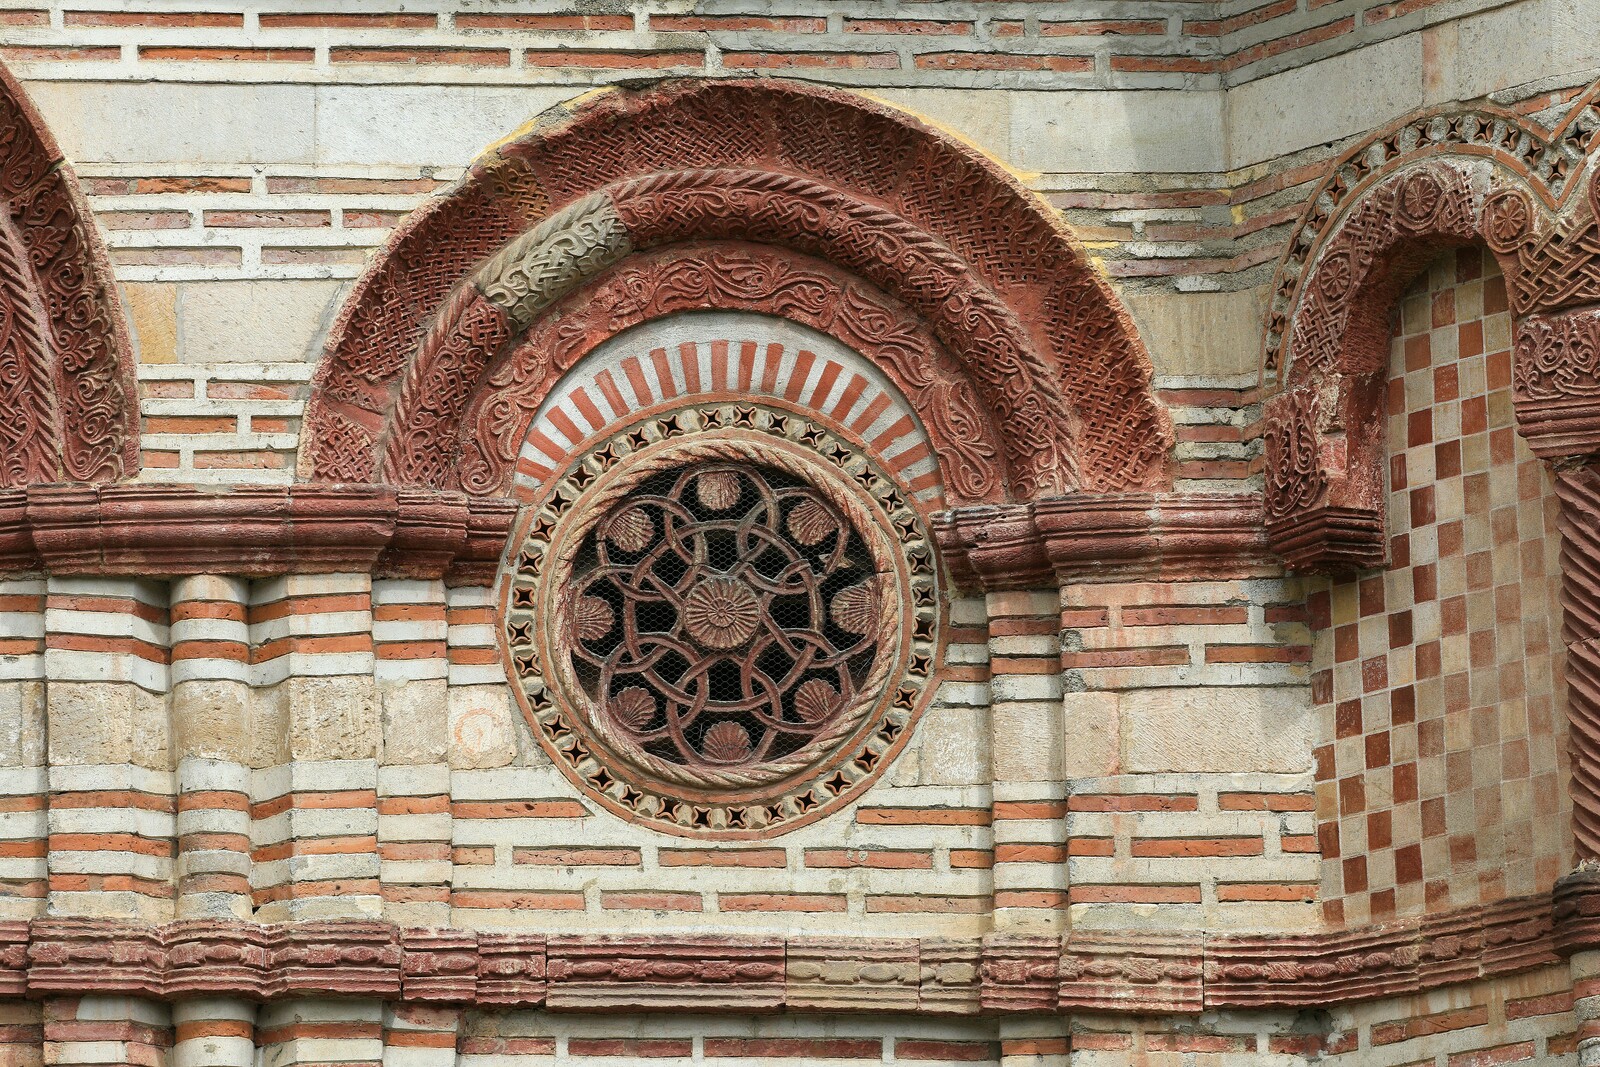 Archivolt and Rosette on the South Wall of the Nave